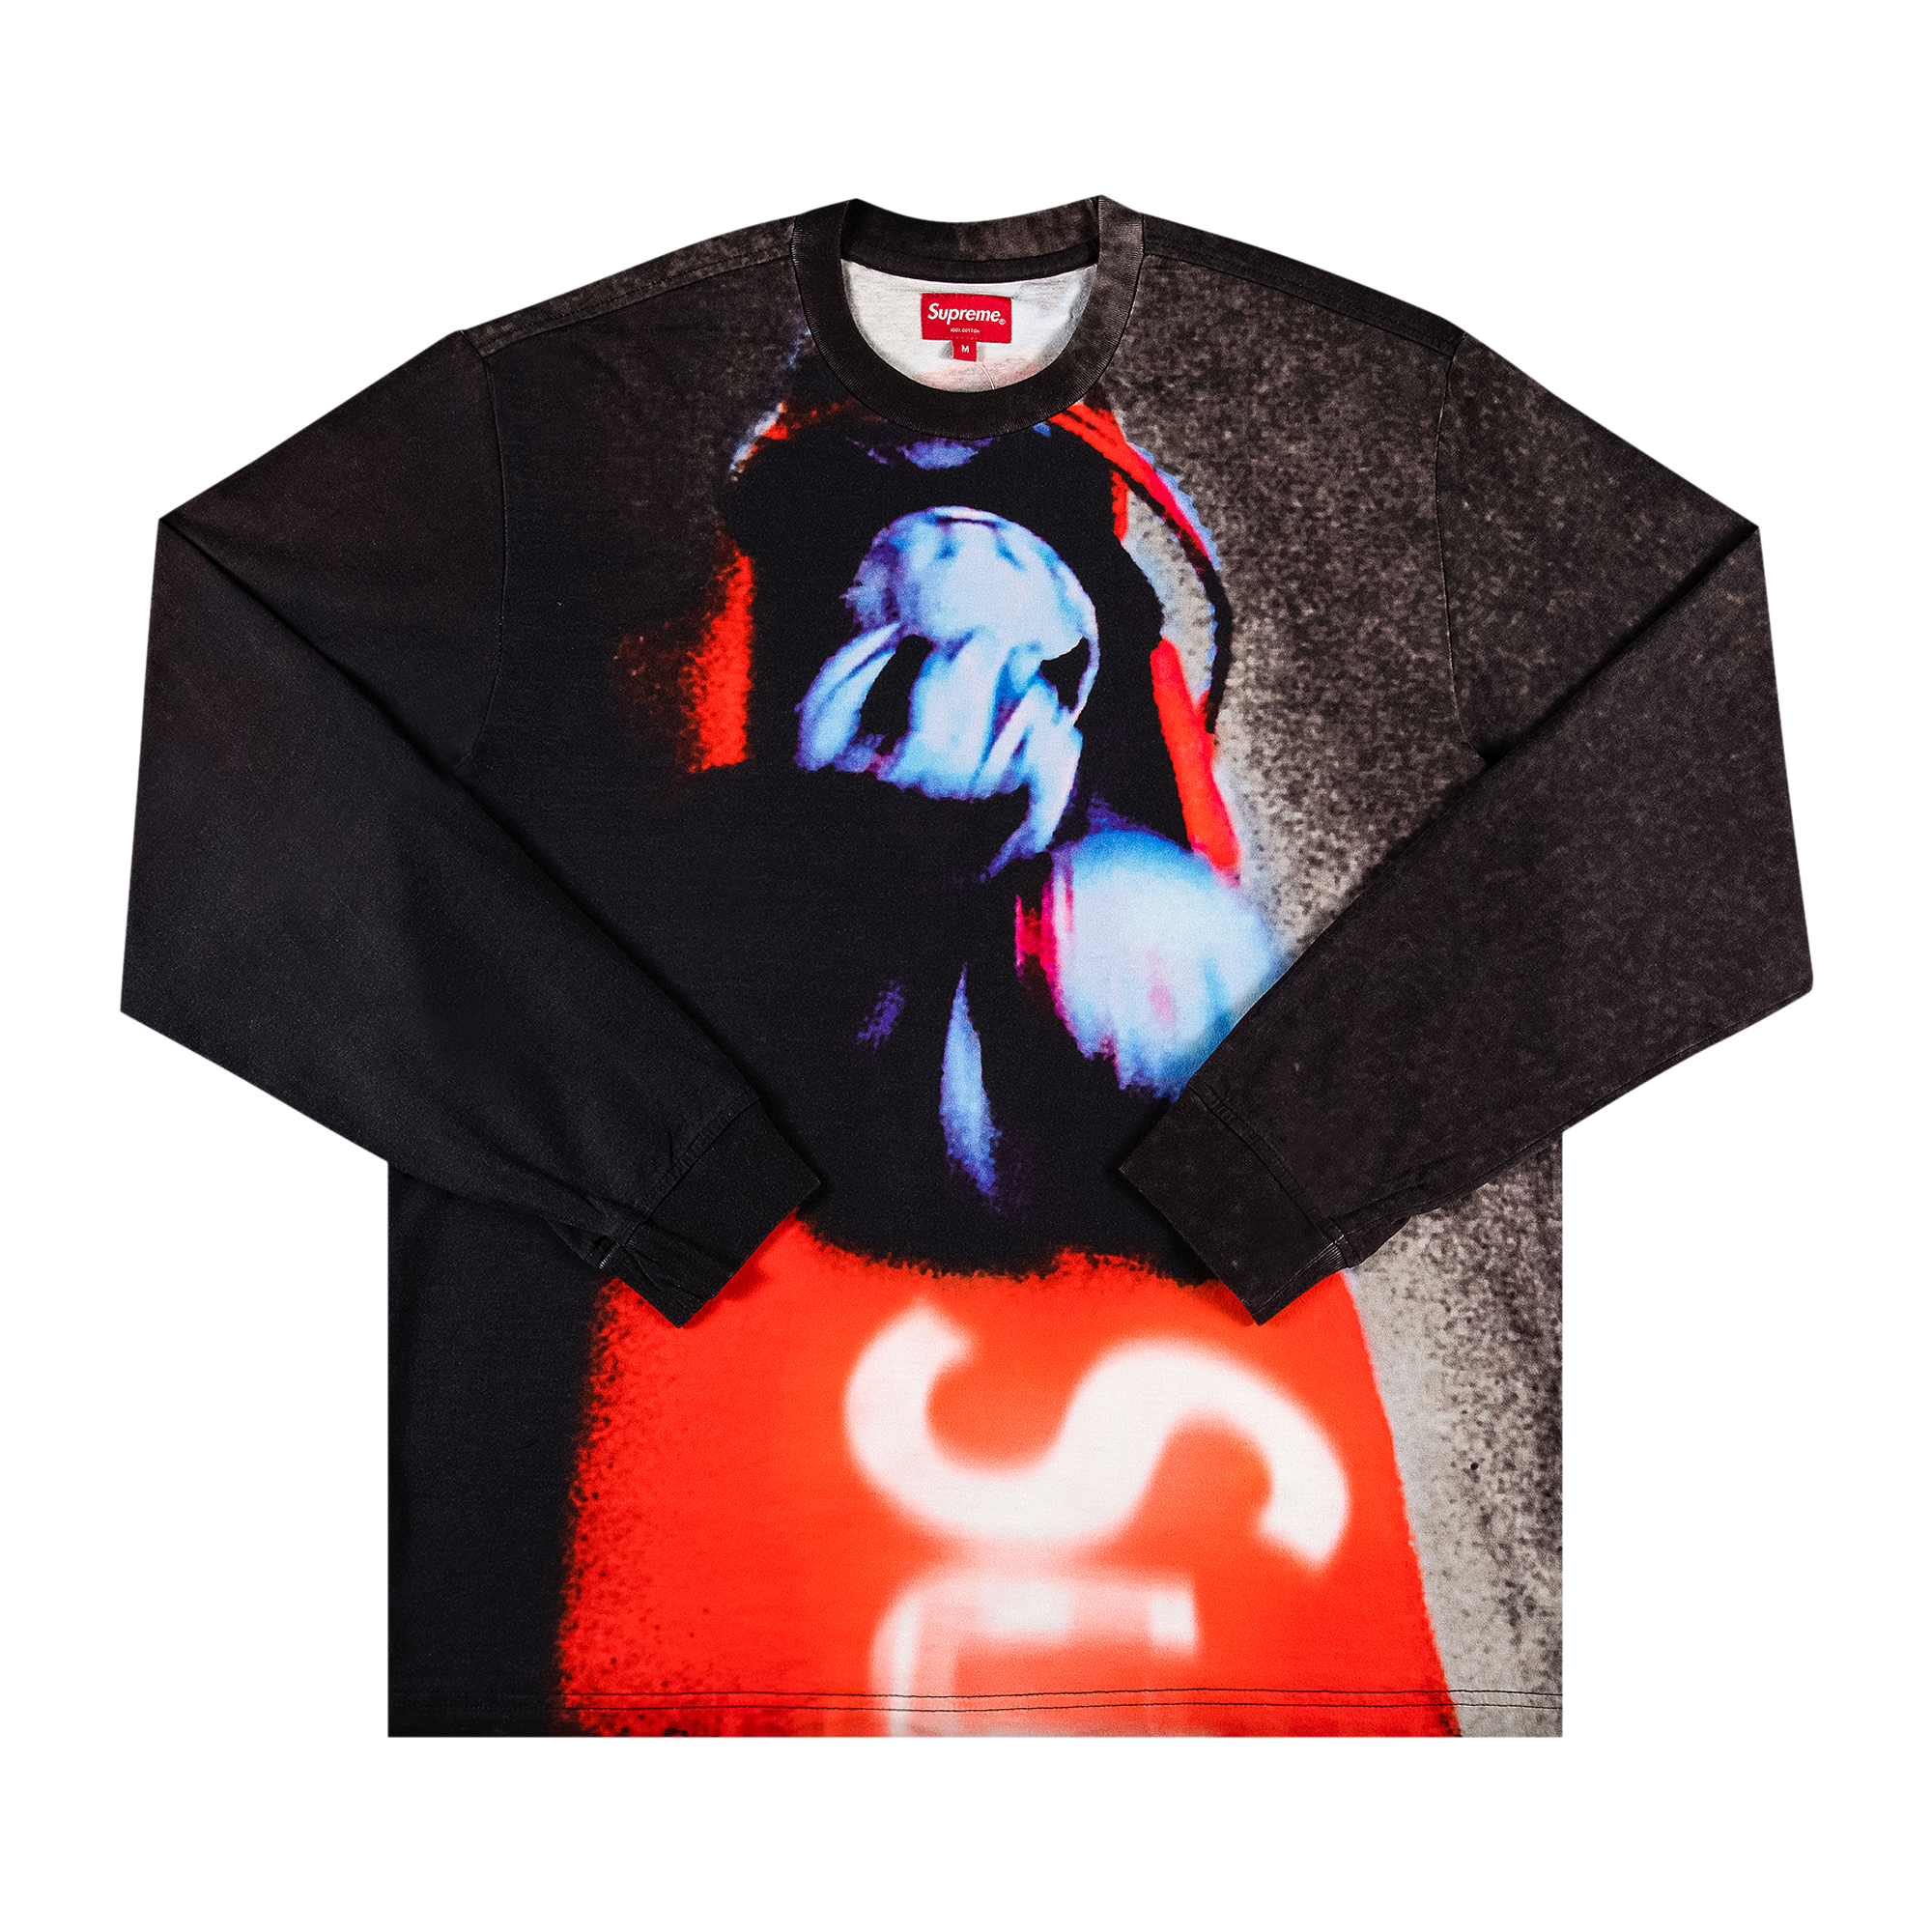 Pre-owned Supreme Bobsled Long-sleeve Top 'black'